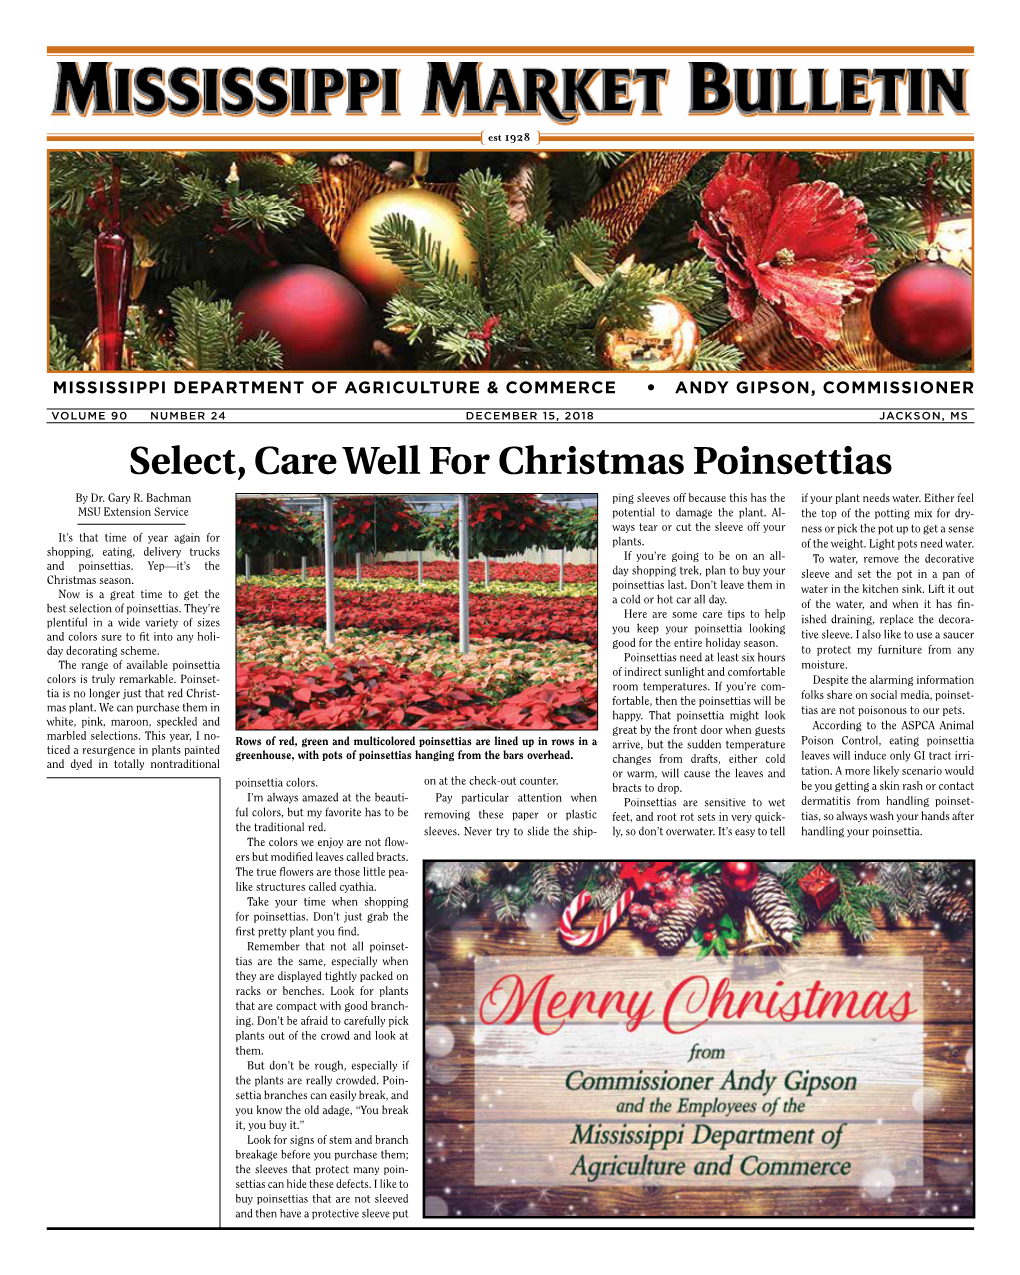 Select, Care Well for Christmas Poinsettias by Dr